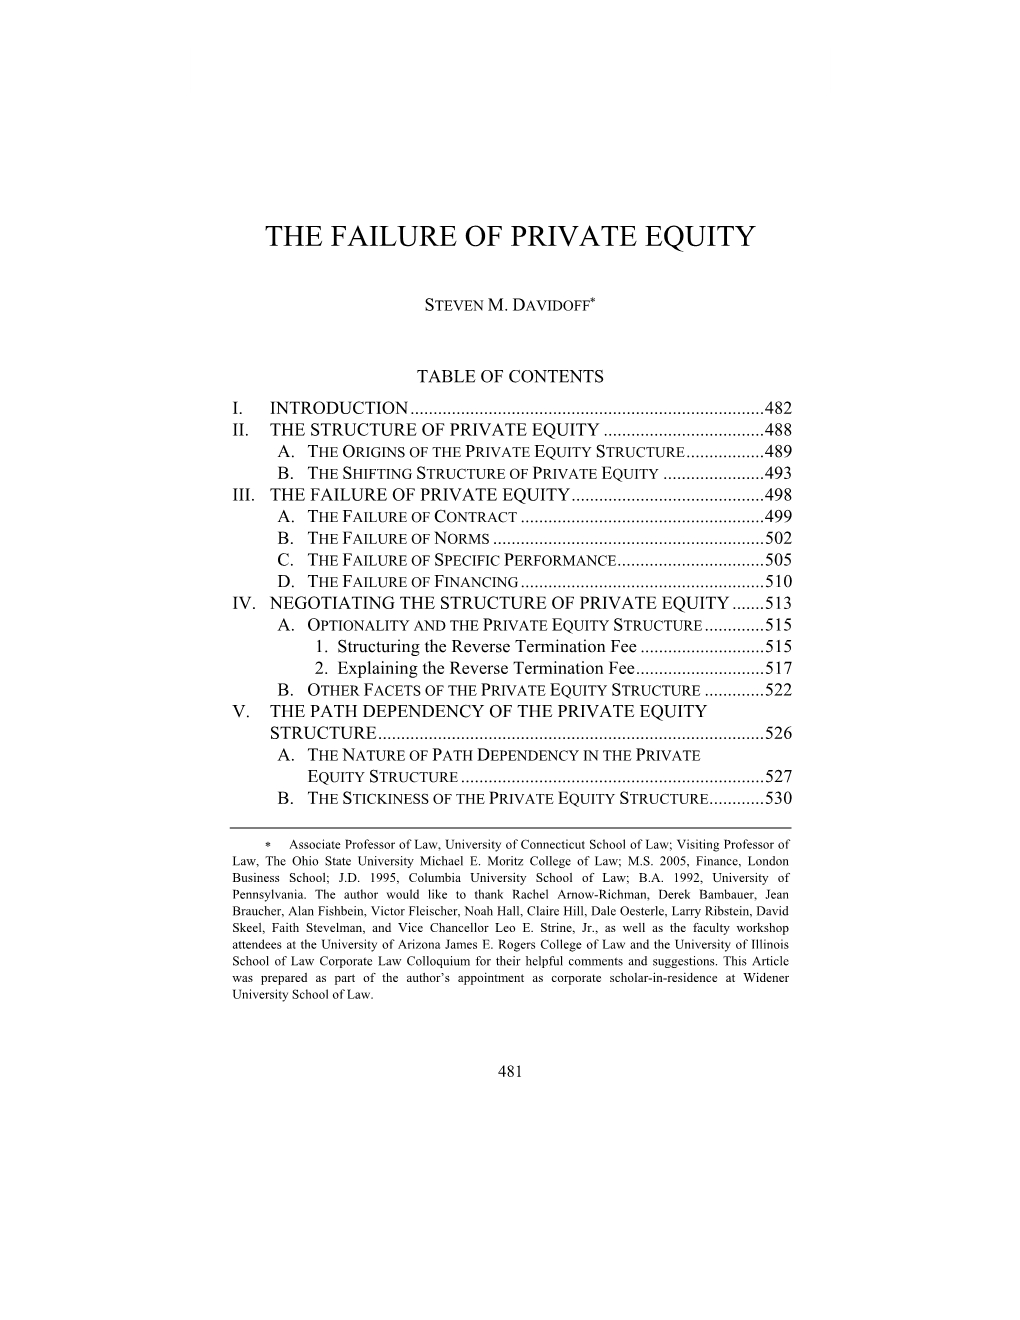 The Failure of Private Equity